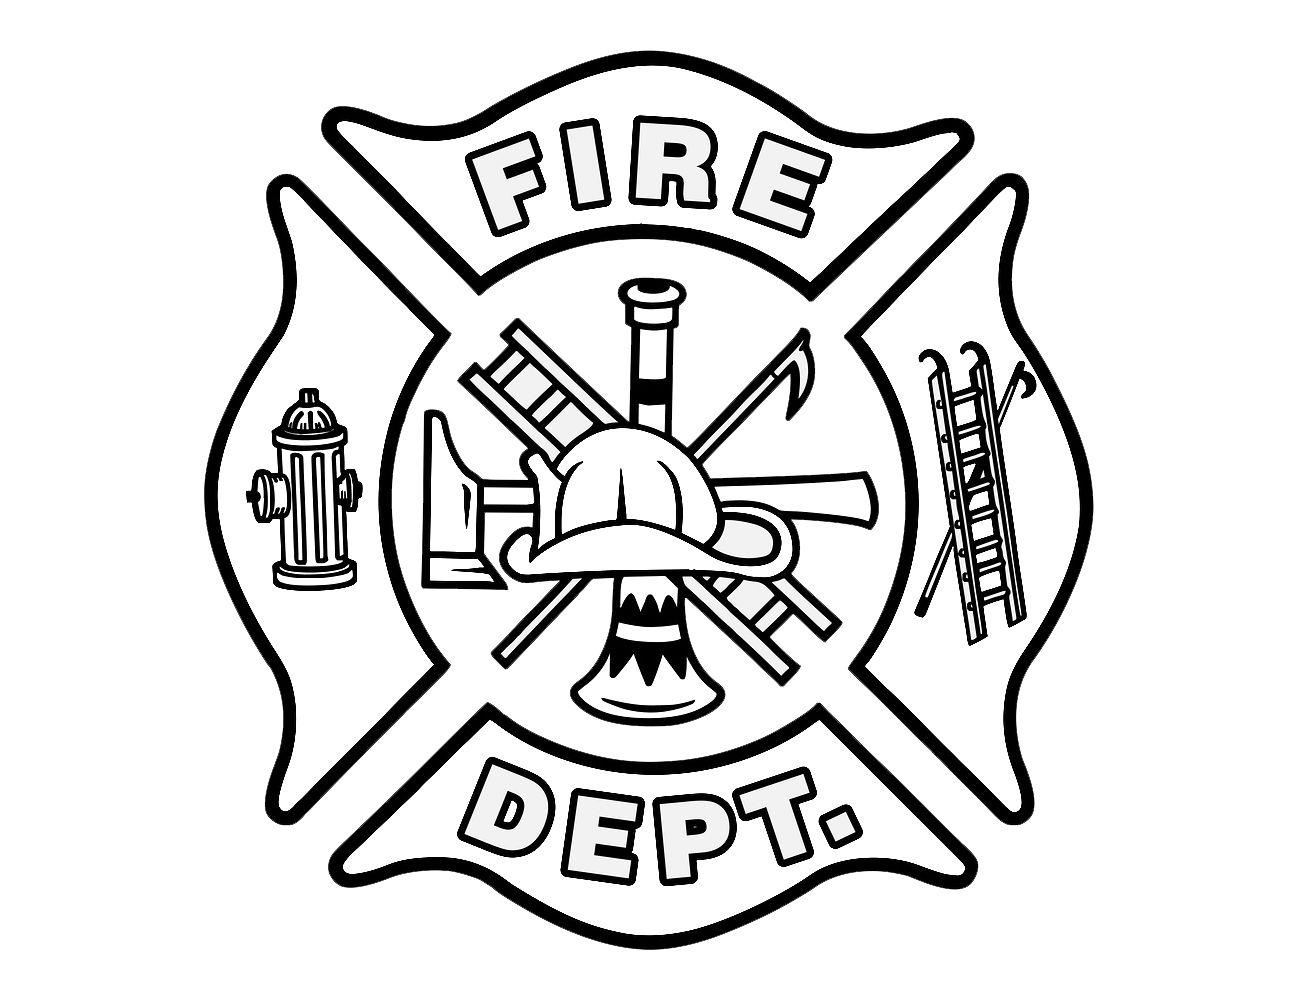 Fireman Symbol Logo - Fire Department Logo, Fire Department Symbol, Meaning, History and ...